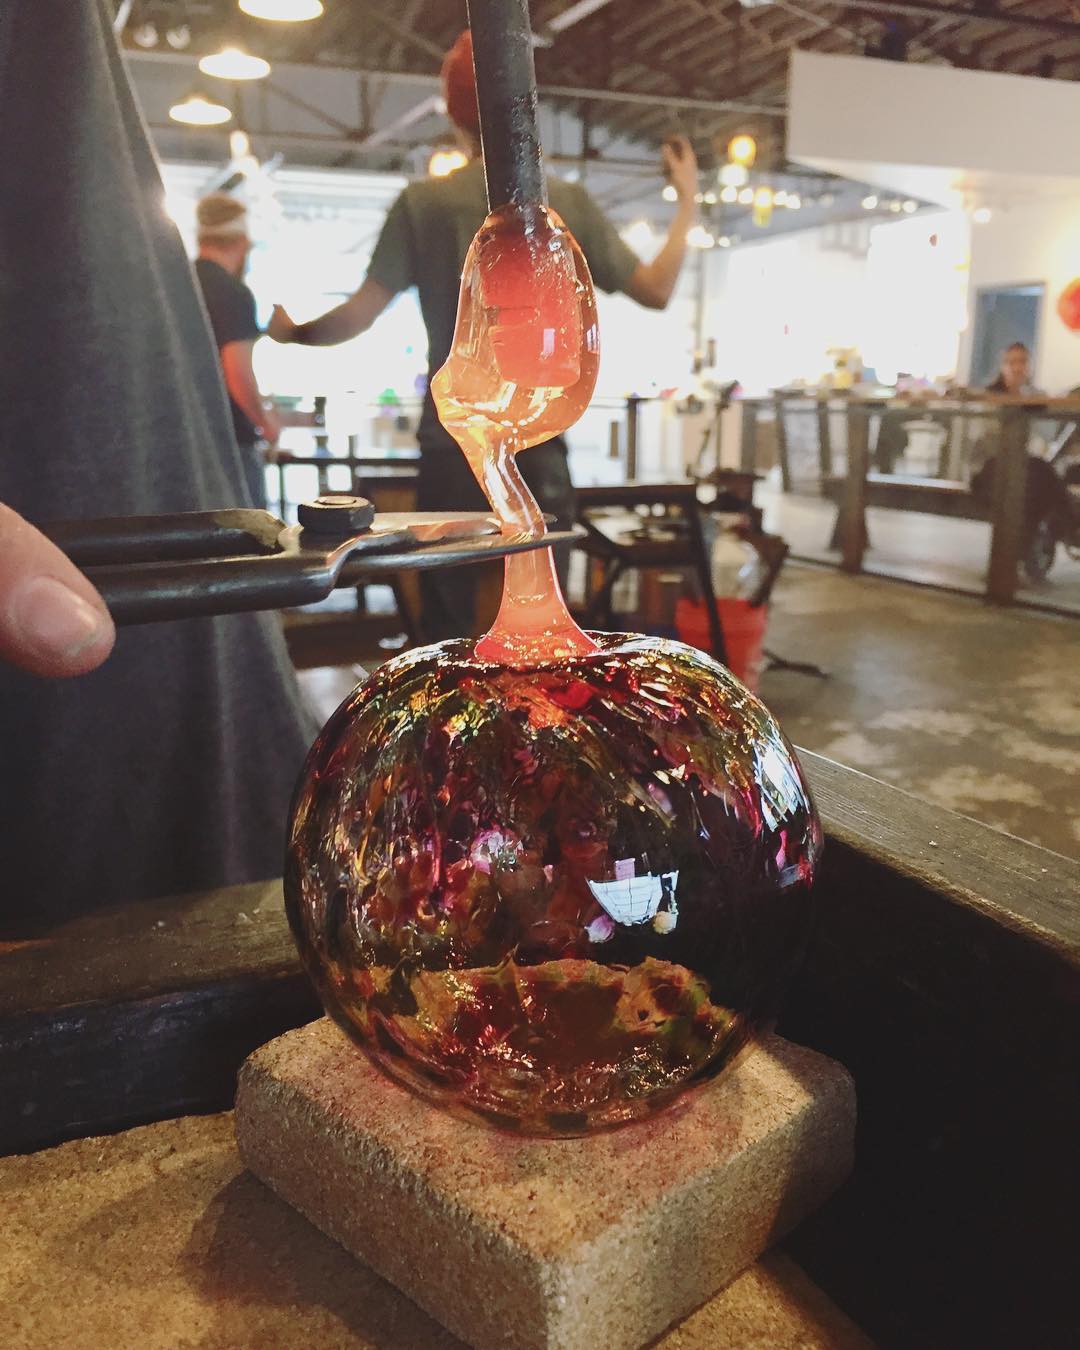 Glass blowing at Lexington Glassworks. Photo by Instagram user @lexingtonglass